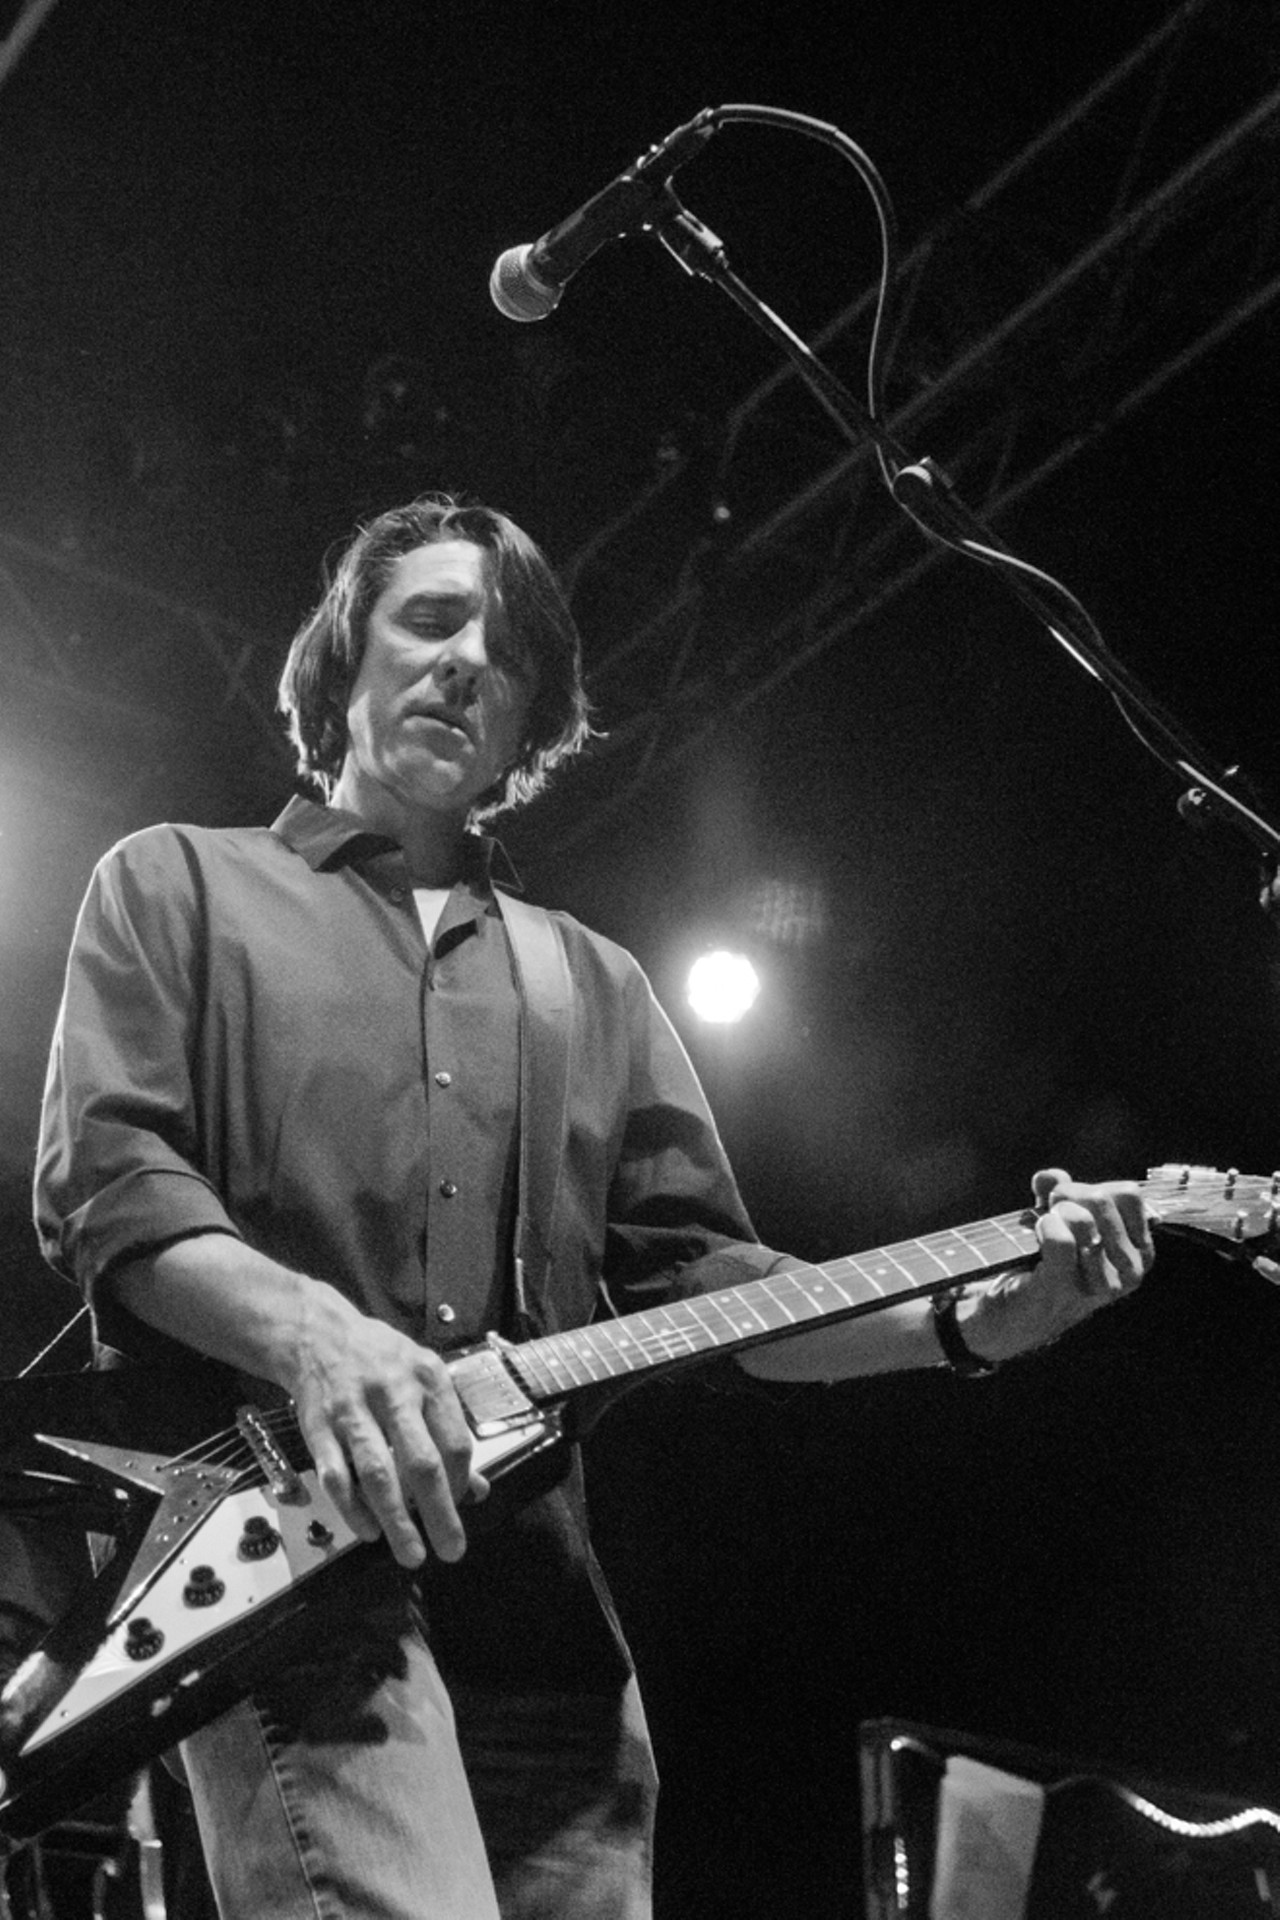 Let there be rock: Photos of Drive-By Truckers at the Beacham